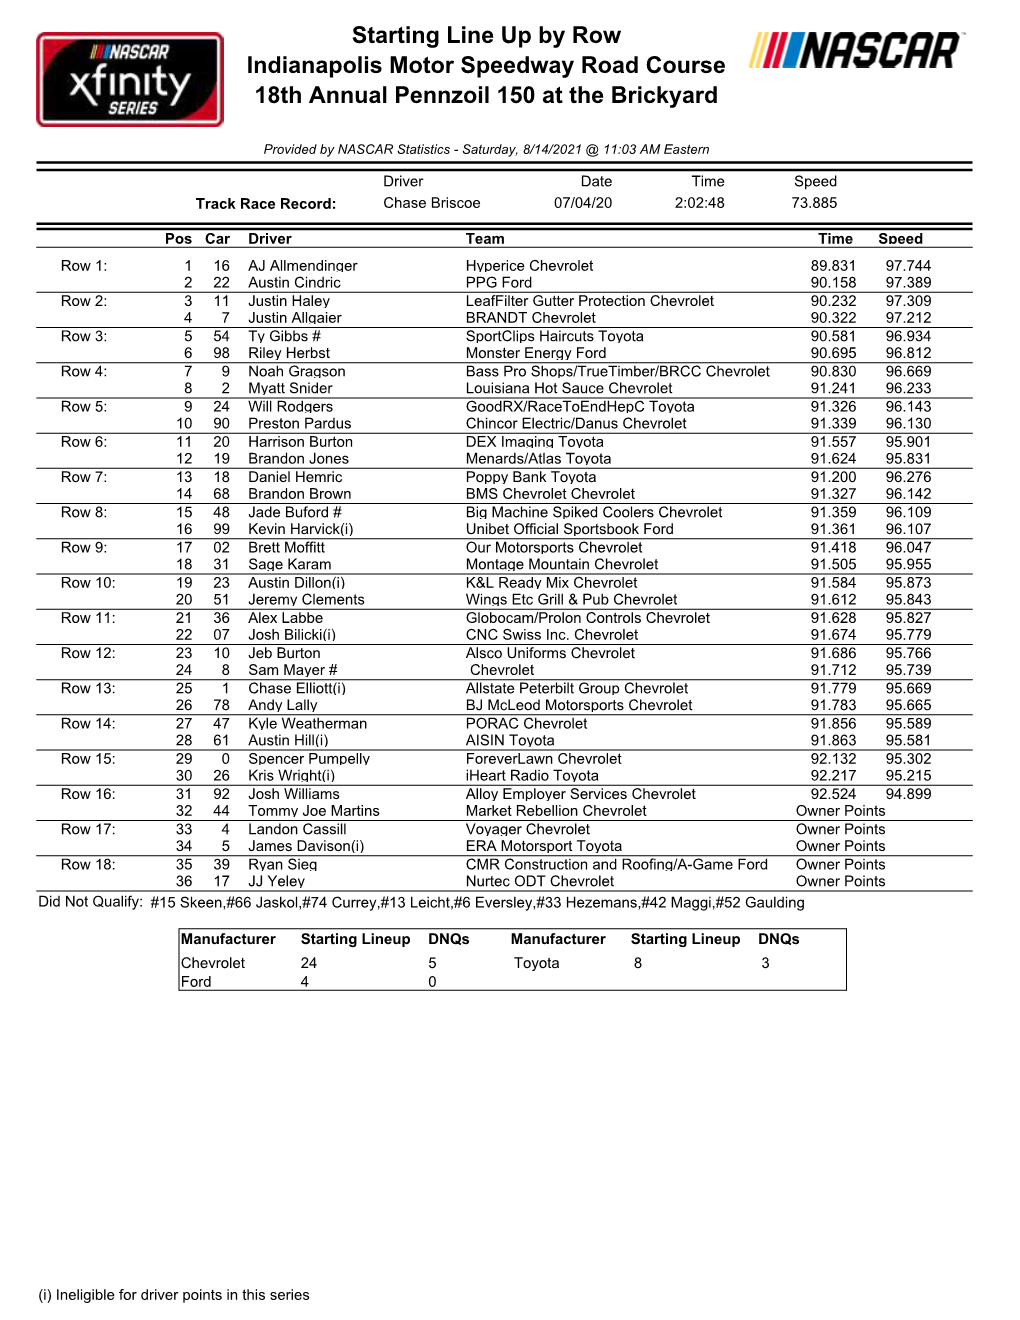 Starting Line up by Row Indianapolis Motor Speedway Road Course 18Th Annual Pennzoil 150 at the Brickyard